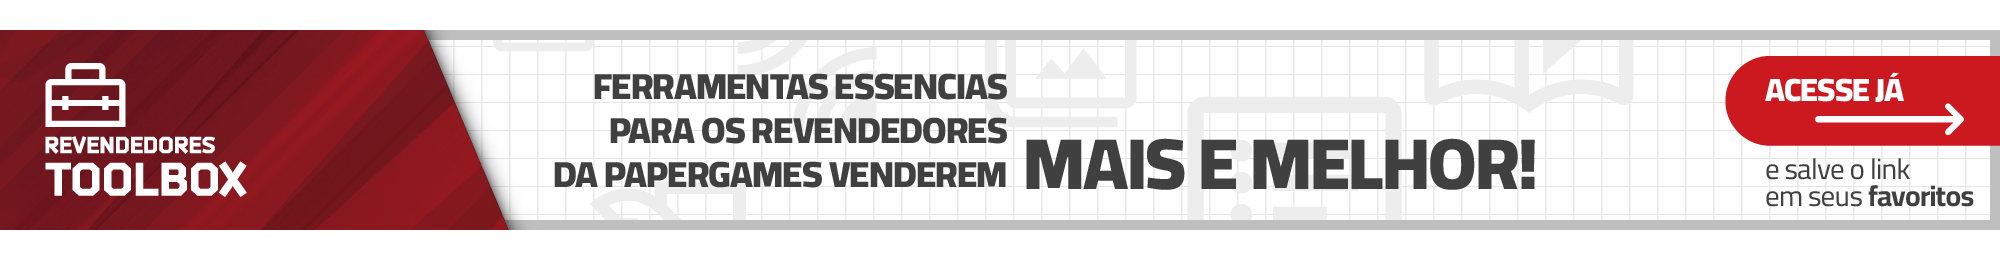 Revendedores Toolbox